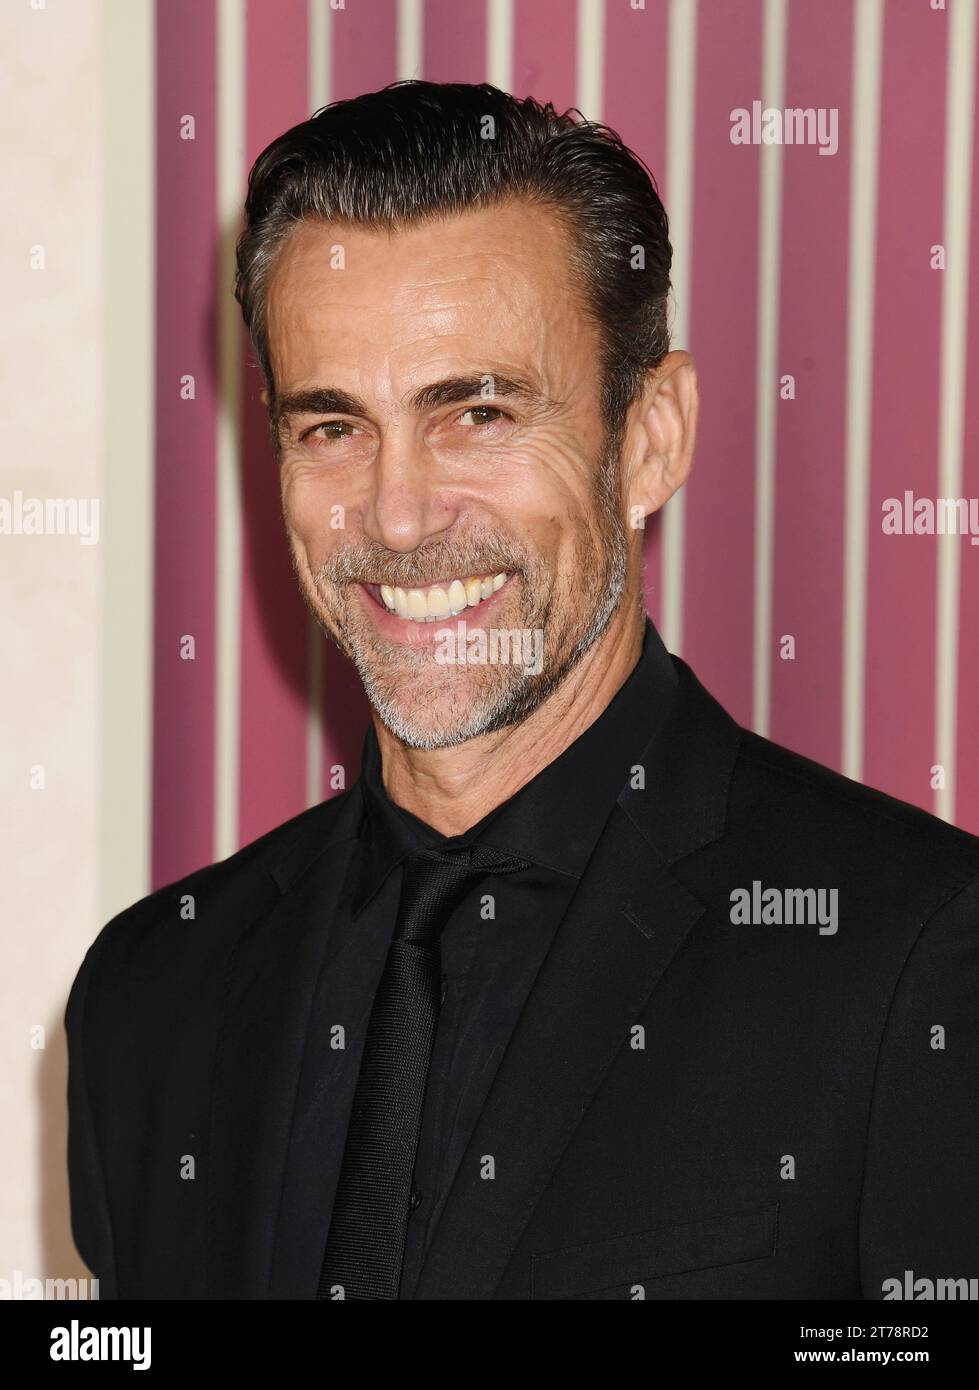 HOLLYWOOD, CALIFORNIA - NOVEMBER 13: Daniel Bernhardt attends The Ballad of Songbirds & Snakes' Los Angeles Premiere at TCL Chinese Theatre on Novembe Stock Photo